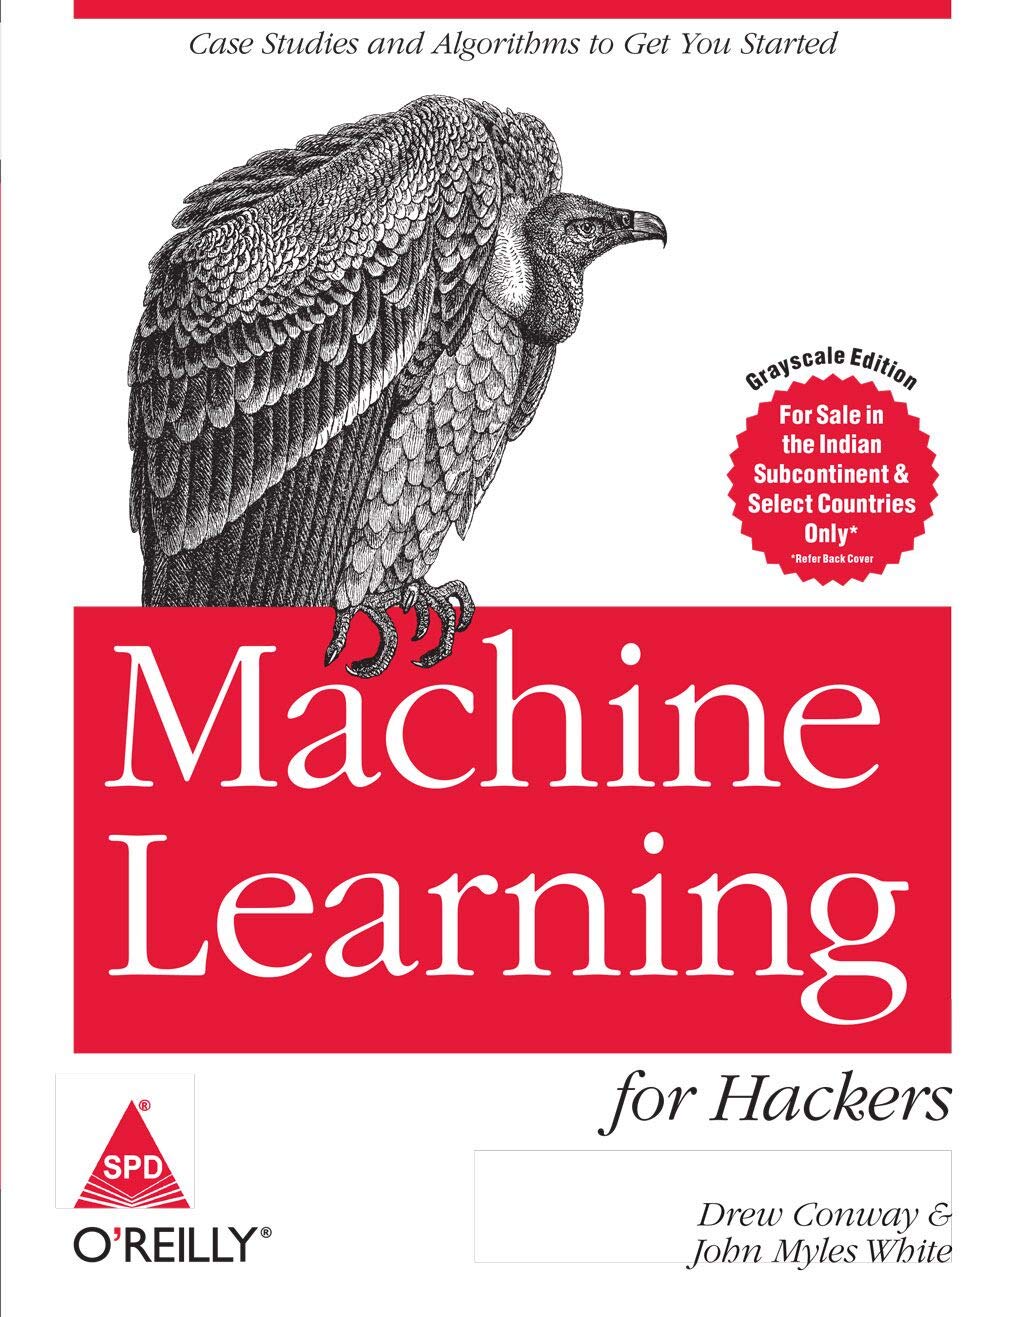 Machine Learning for Hackers_Case Studies and Algorithms to Get You Started (2012) by Drew Conway, John Myles White - (IG@rkebooks)